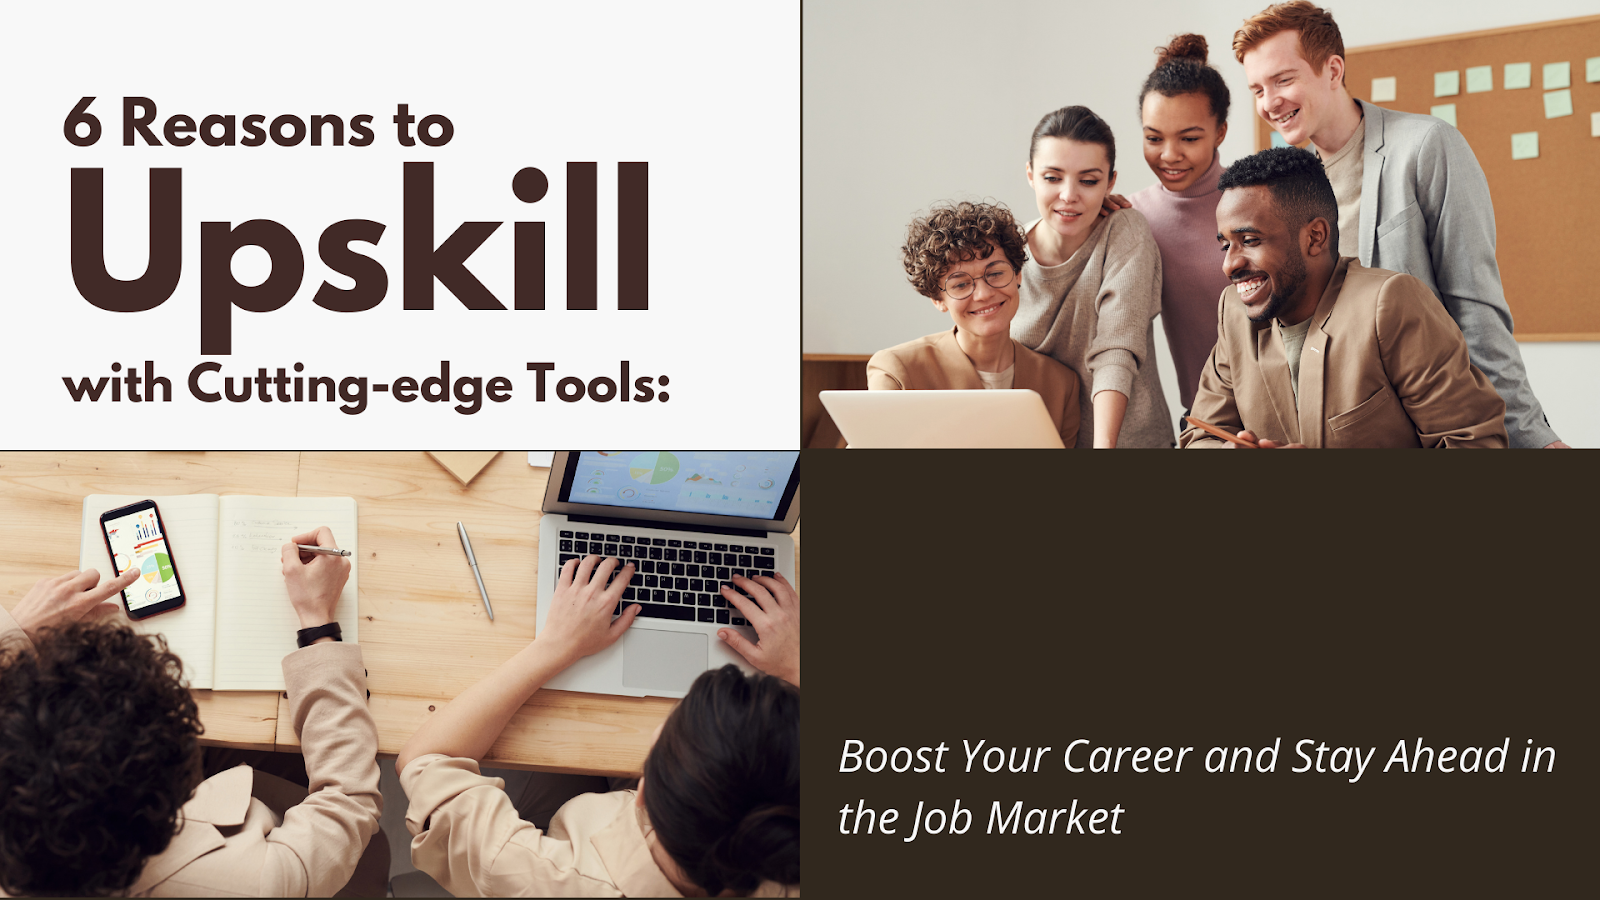 6 Reasons to Upskill with Cutting-edge Tools: Boost Your Career and Stay Ahead in the Job Market